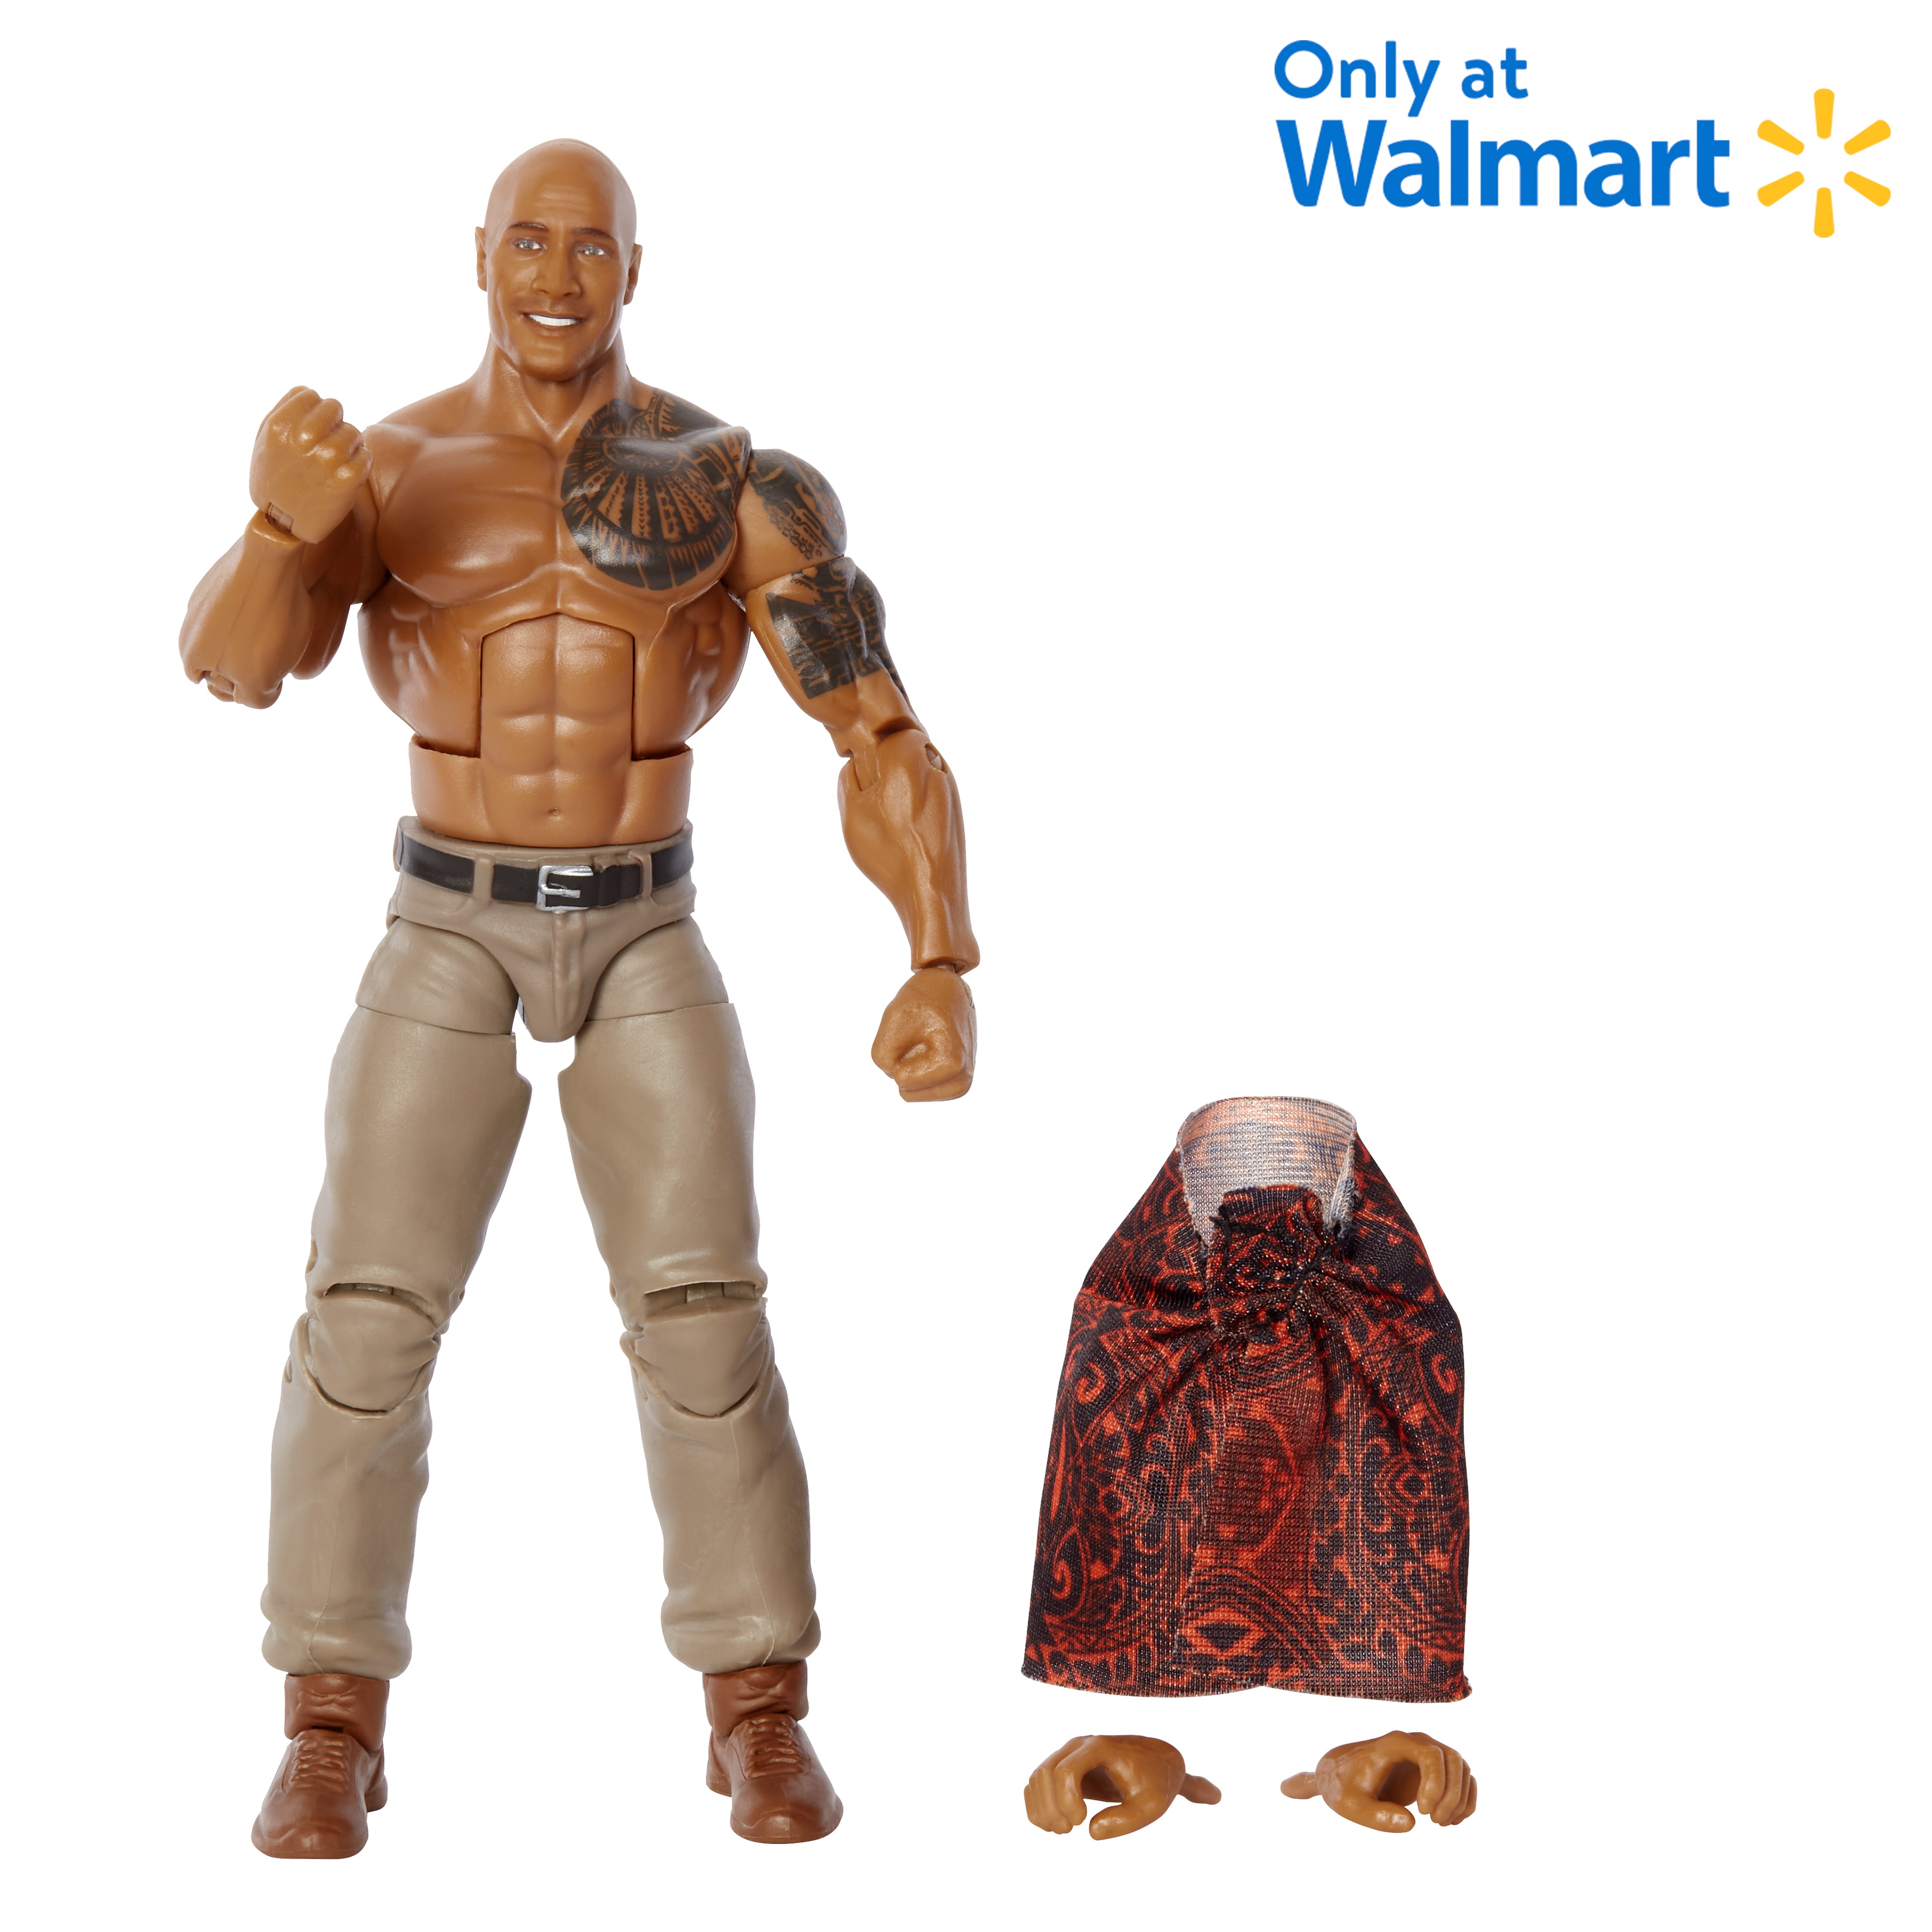 WWE Wrestling Mini Action Figure The Rock New Collectible 3 Inch